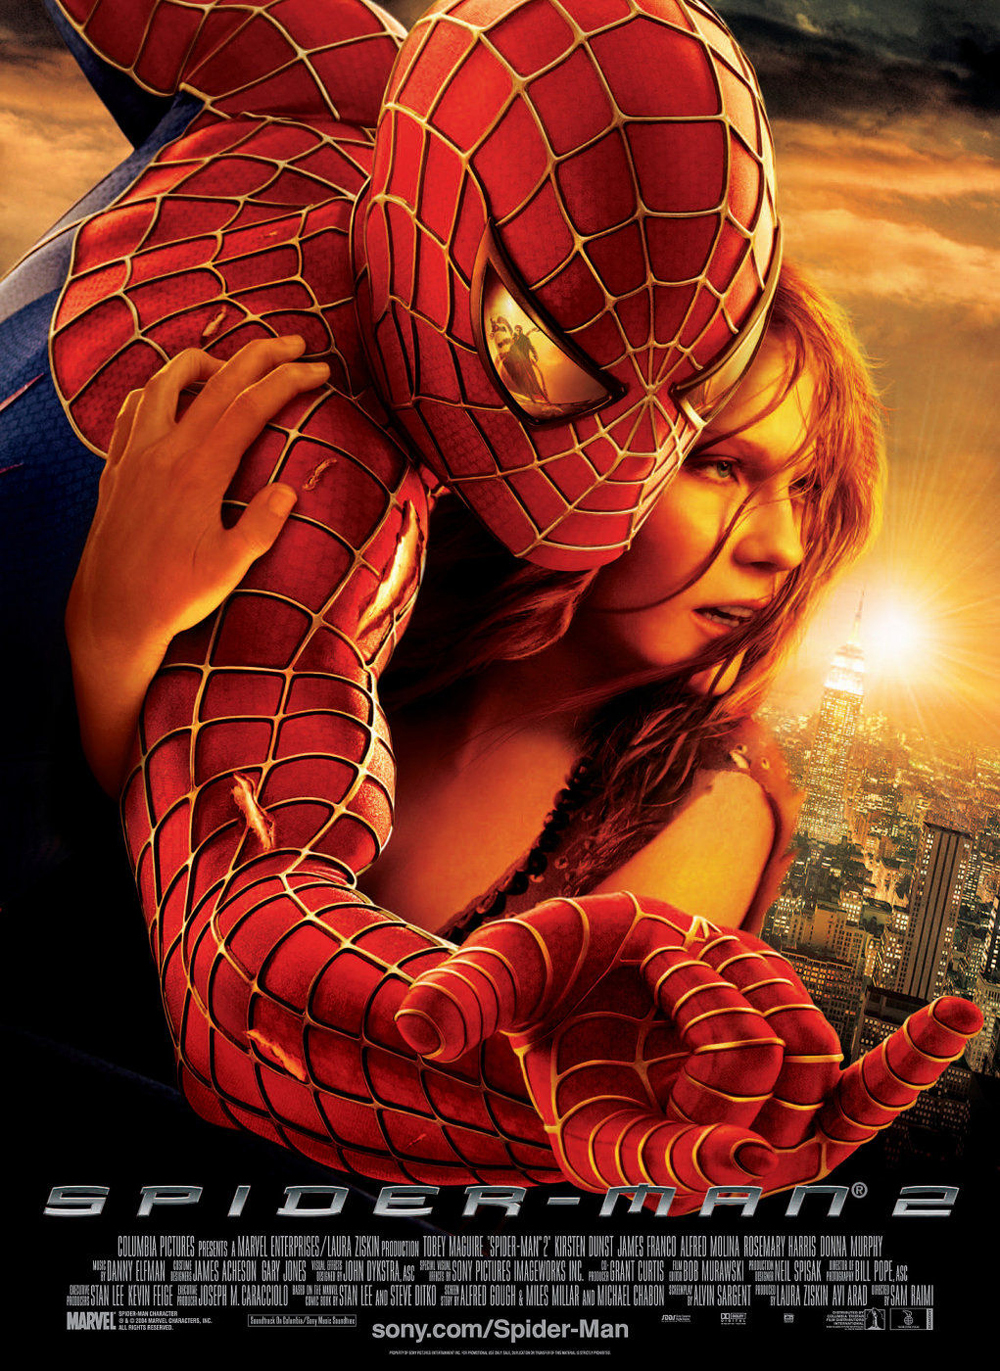 The Amazing Spider-Man 2' review: The enemy within